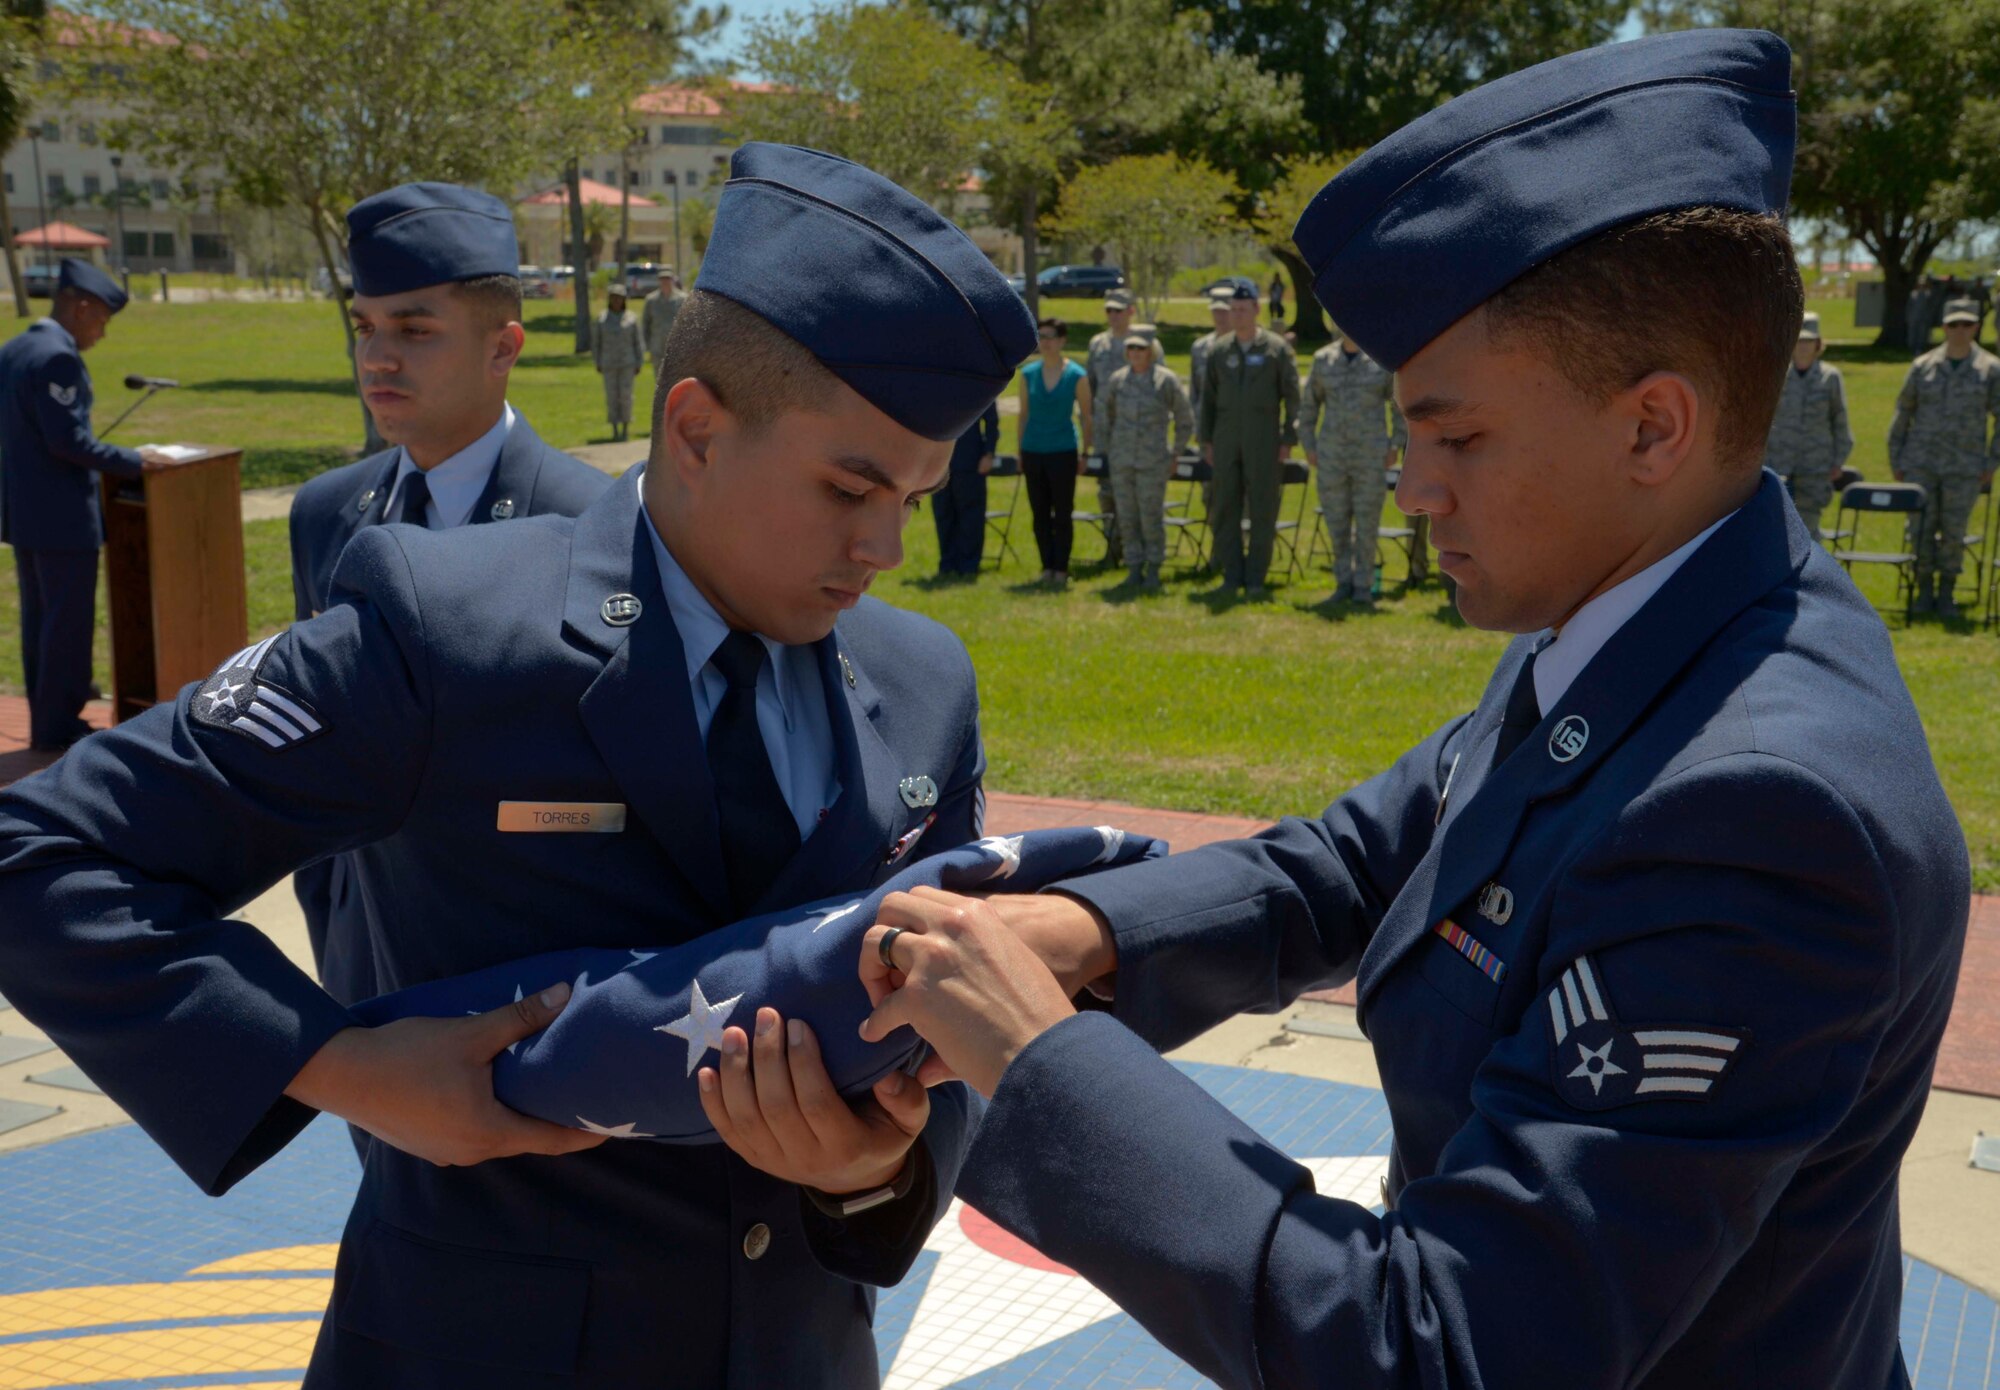 U.S. Air Force Senior Airman Francisco Torres Lopez, left, a vehicle maintenance mechanic assigned to the 6th Logistics Readiness Squadron, and Senior Airman Kevin Beasley, right, an air traffic controller assigned to the 6th Operations Support Squadron, fold an American flag during a Memorial Day ceremony at MacDill Air Force Base, Fla., May 26, 2017. Four Airmen rendered honors to the American flag to pay respect to fallen heroes. (U.S. Air Force photo by Staff Sgt. Vernon L. Fowler Jr.)